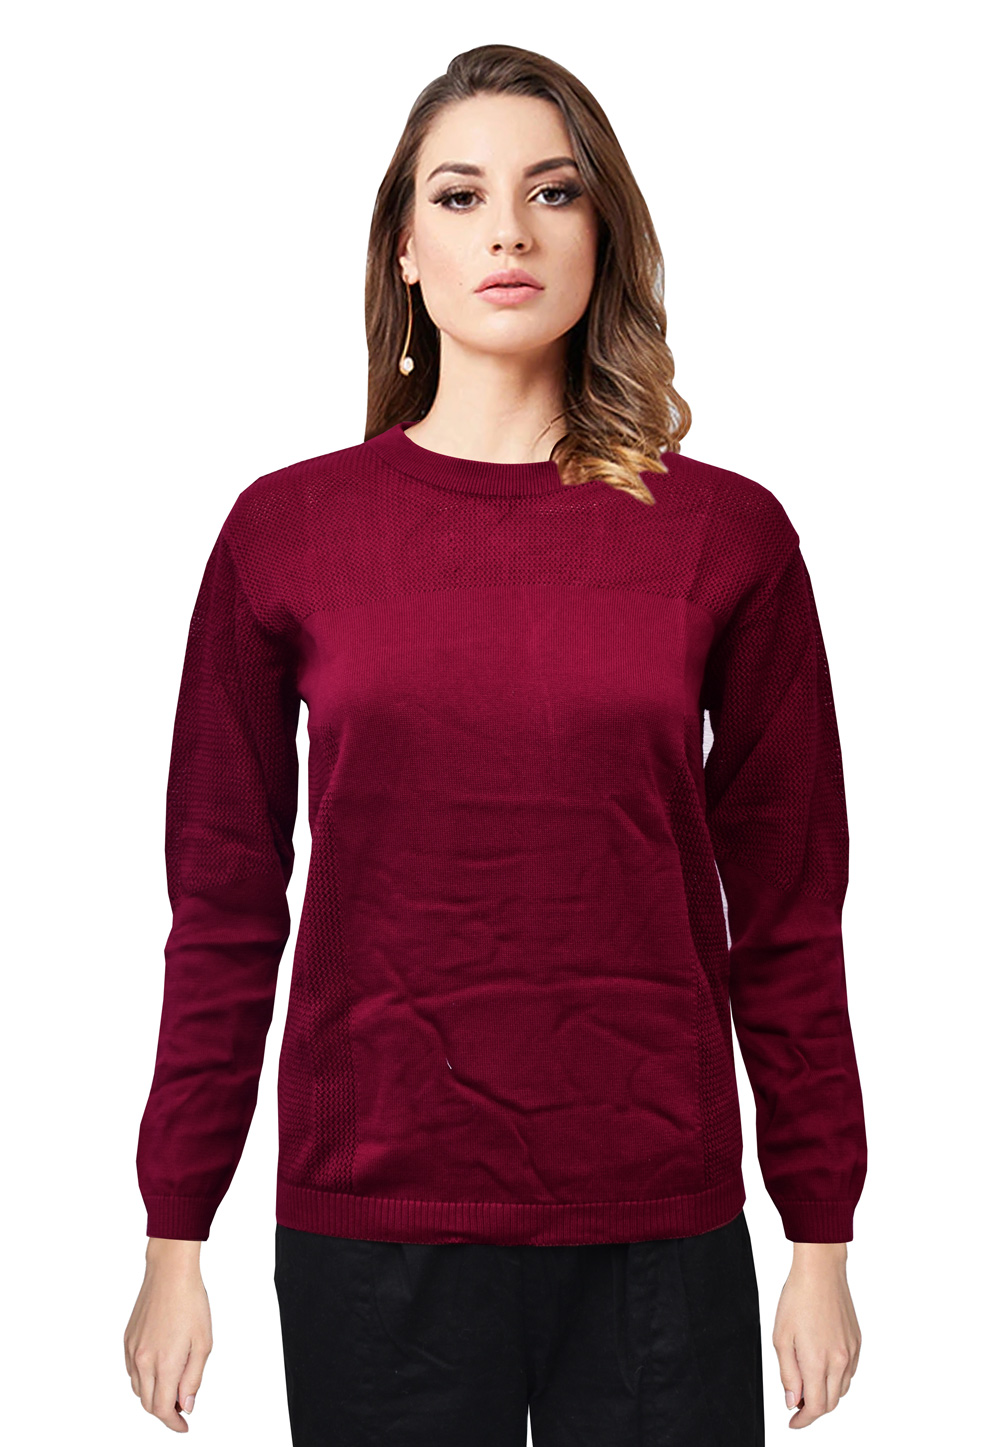 Wine Knitted Sweater Tops 214239